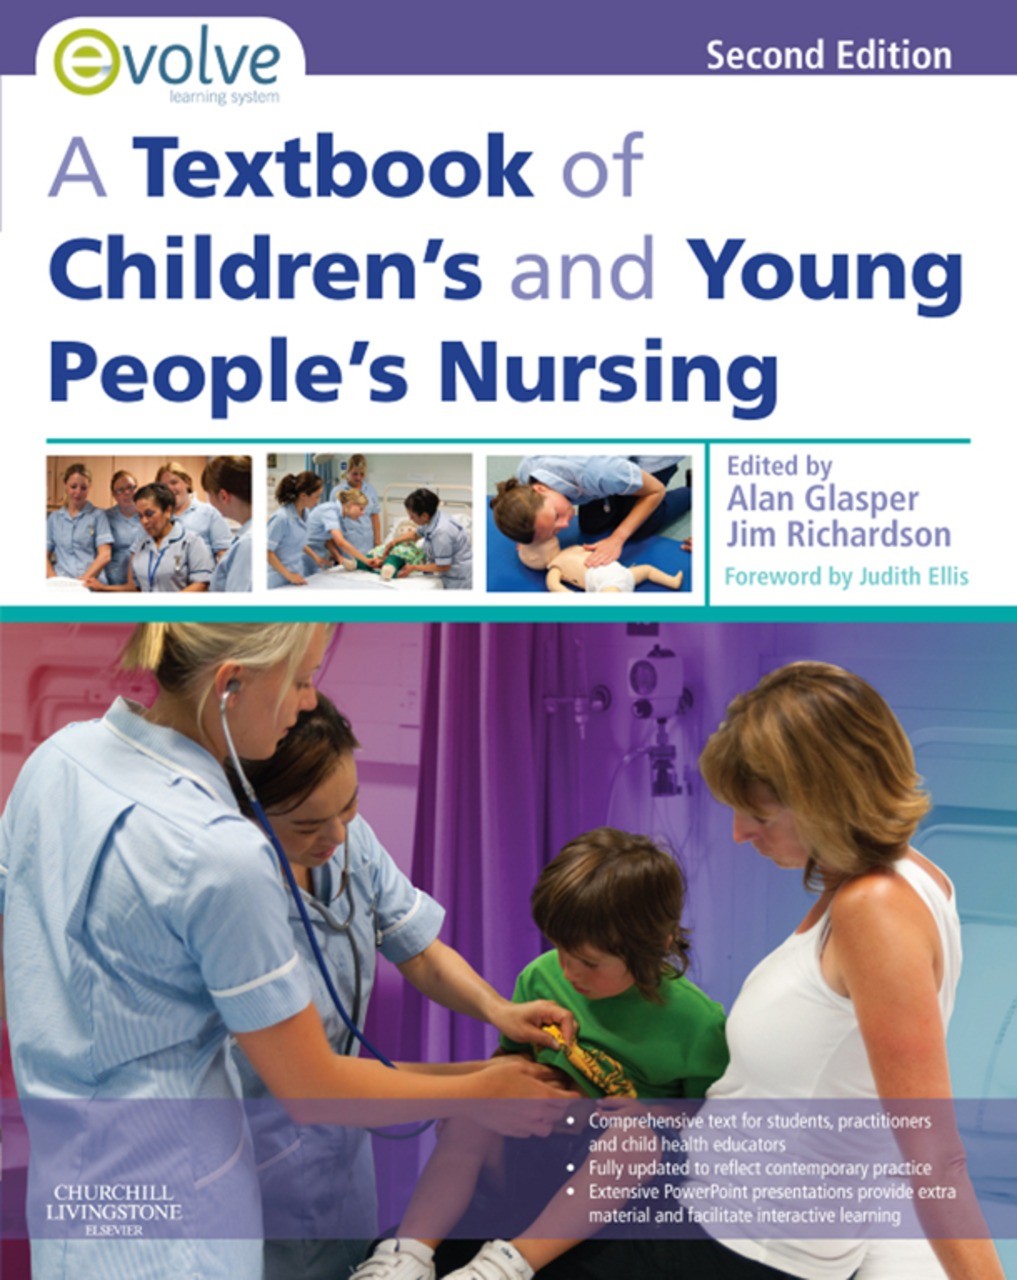 A Textbook of Children's and Young People's Nursing E-Book